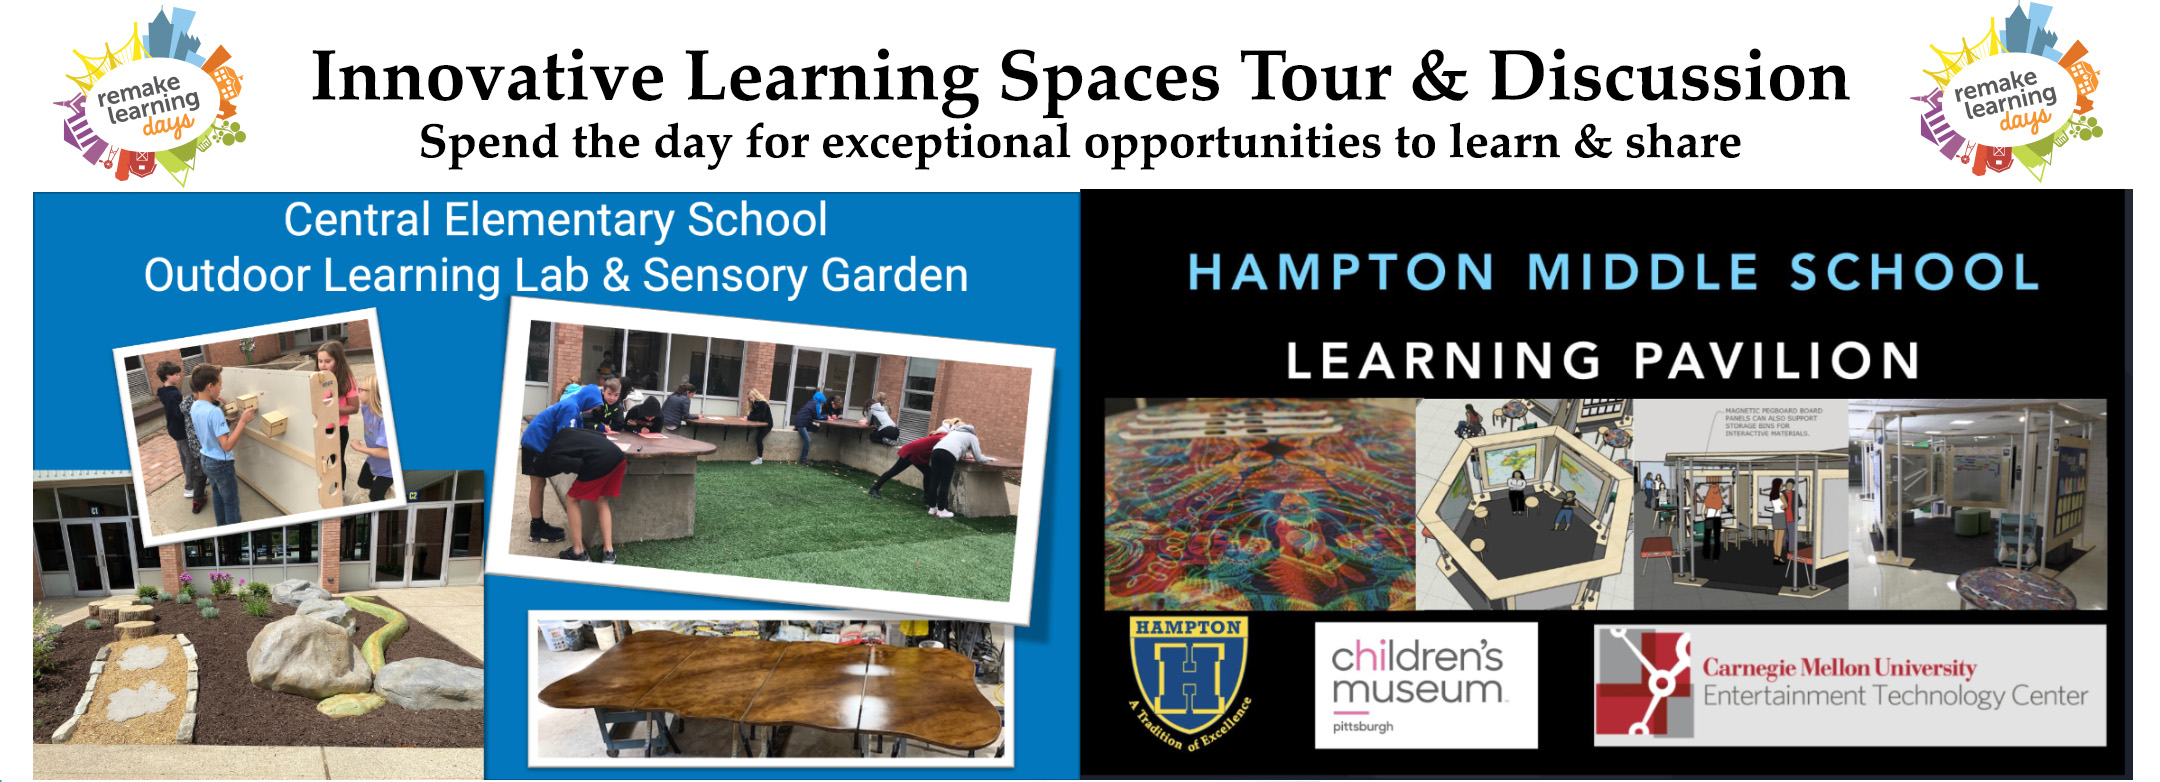 Image for Innovative Learning Spaces Tour & Discussion